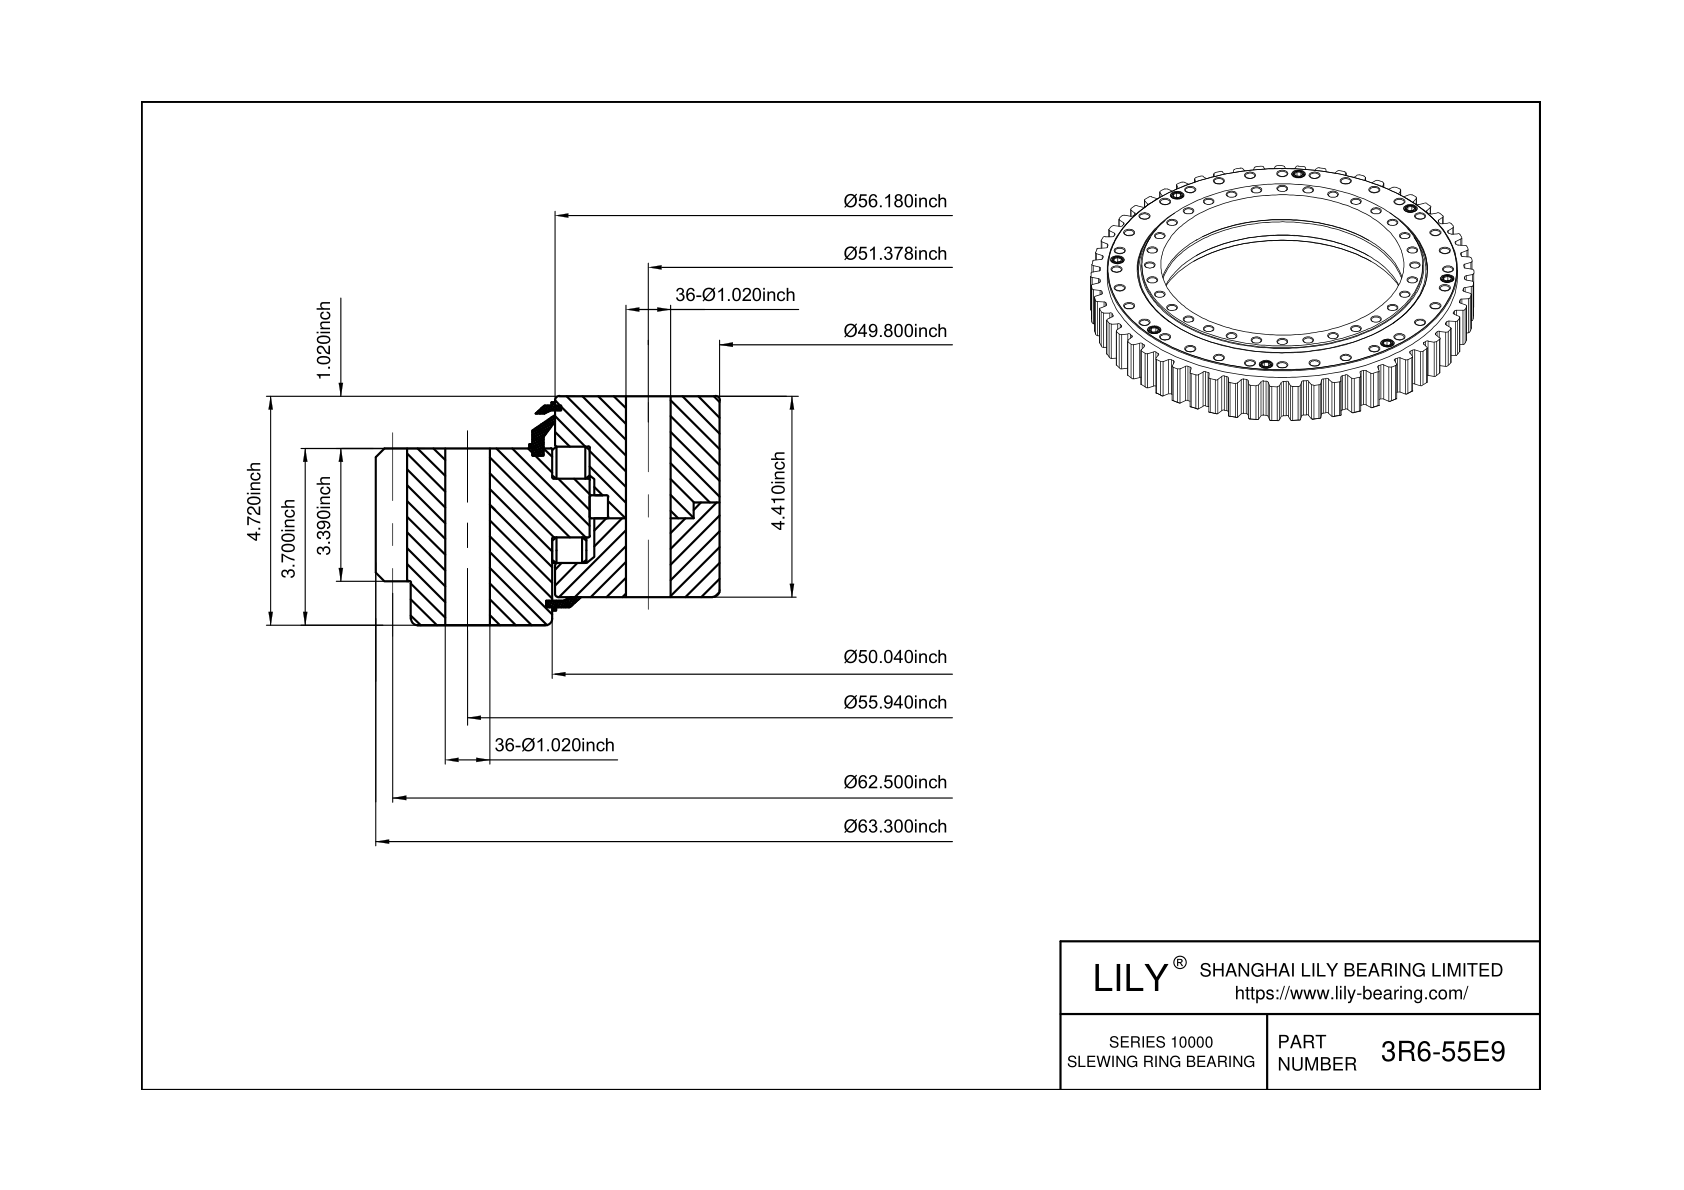 3R6-55E9 Three-Row Cross Roller Slewing Ring Bearing cad drawing